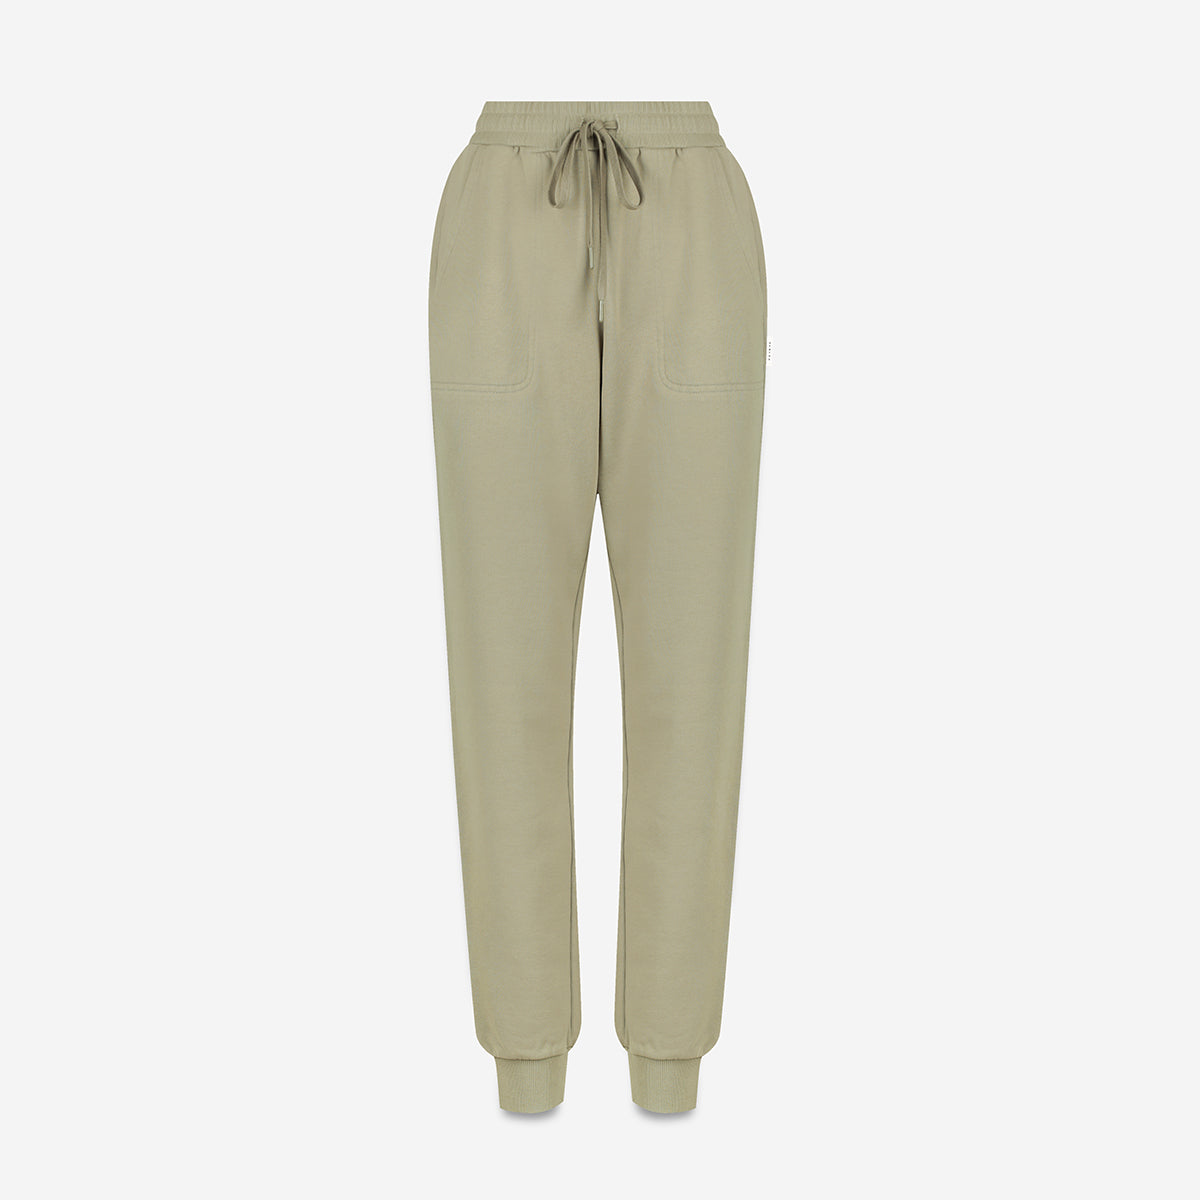 As You Wake - Women's Track Pant / Washed Sage